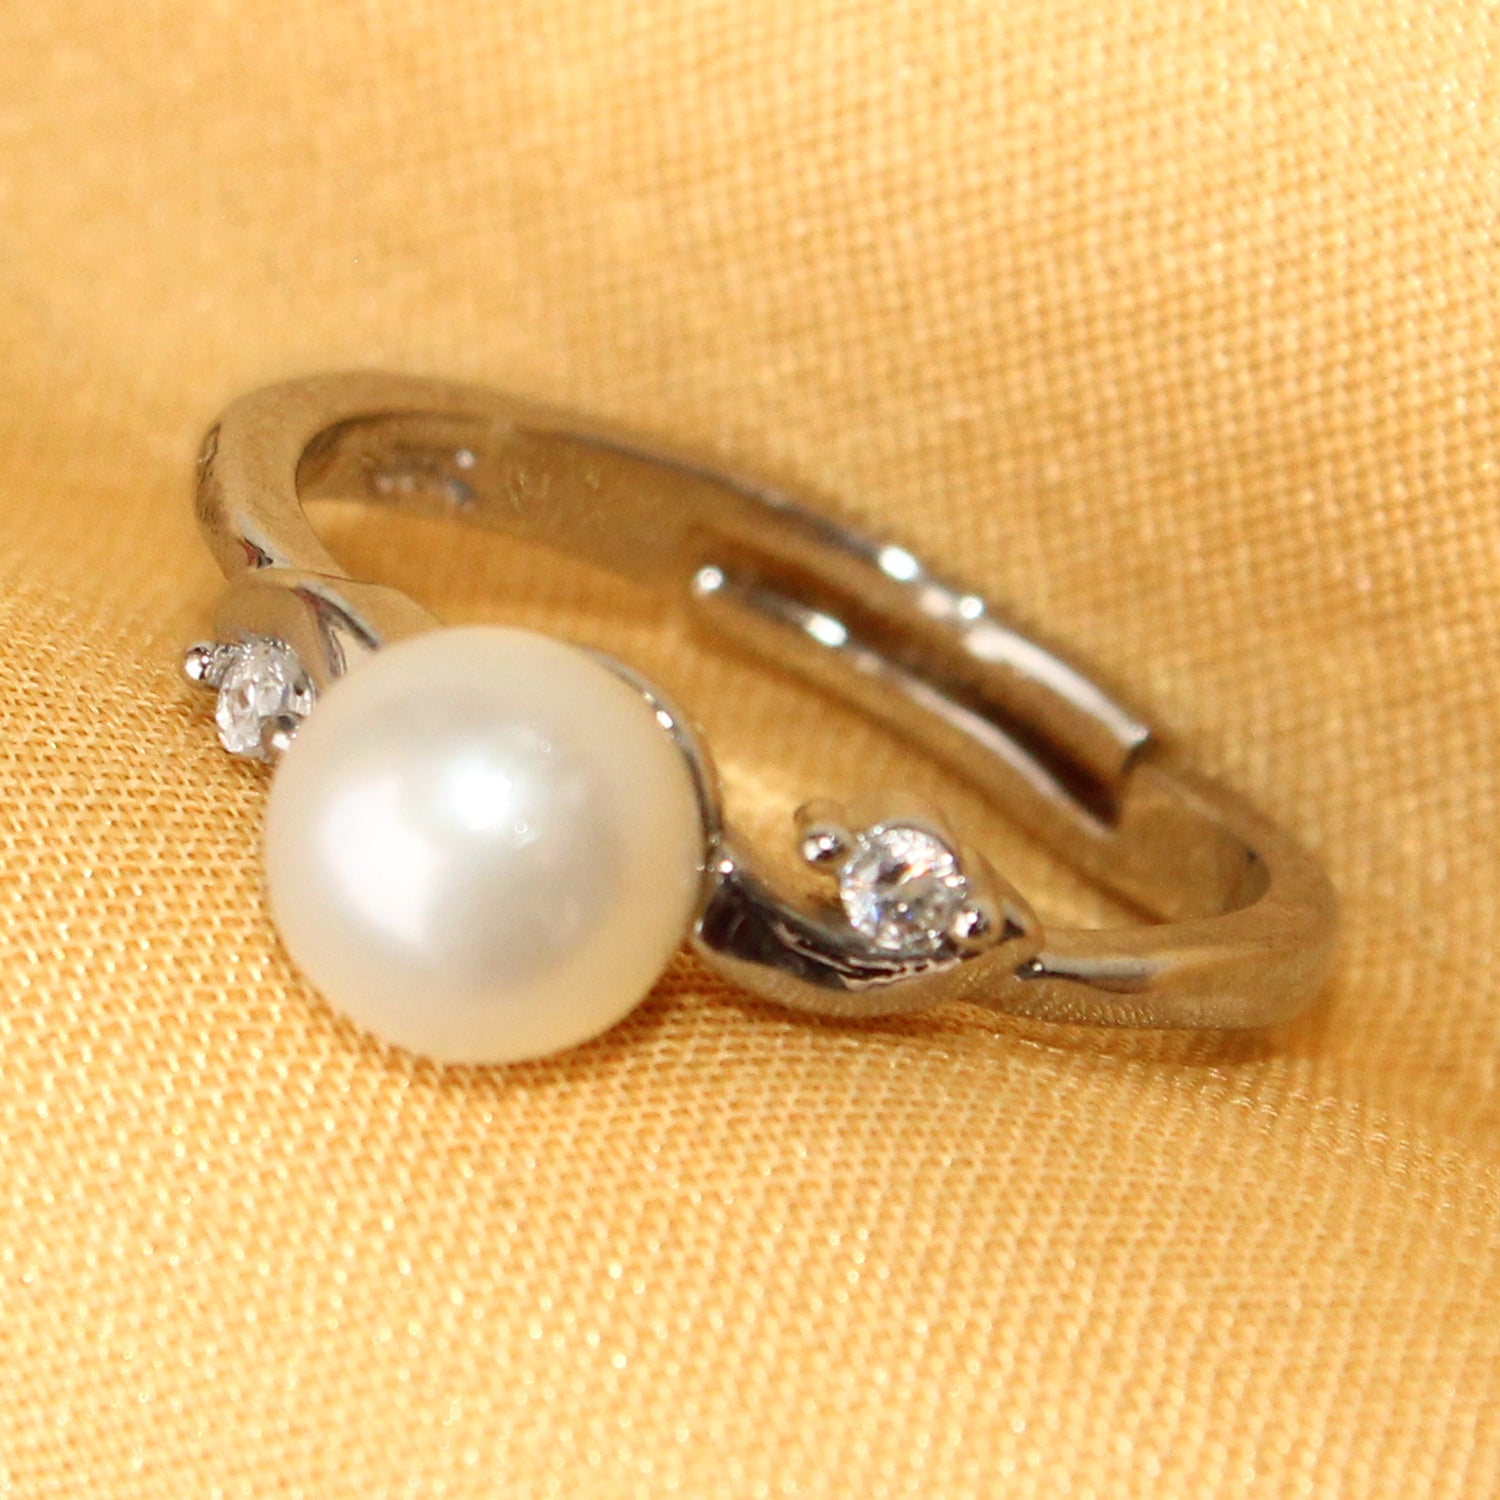 LS-A854 amazing luxury freshwater pearl ring| Alibaba.com